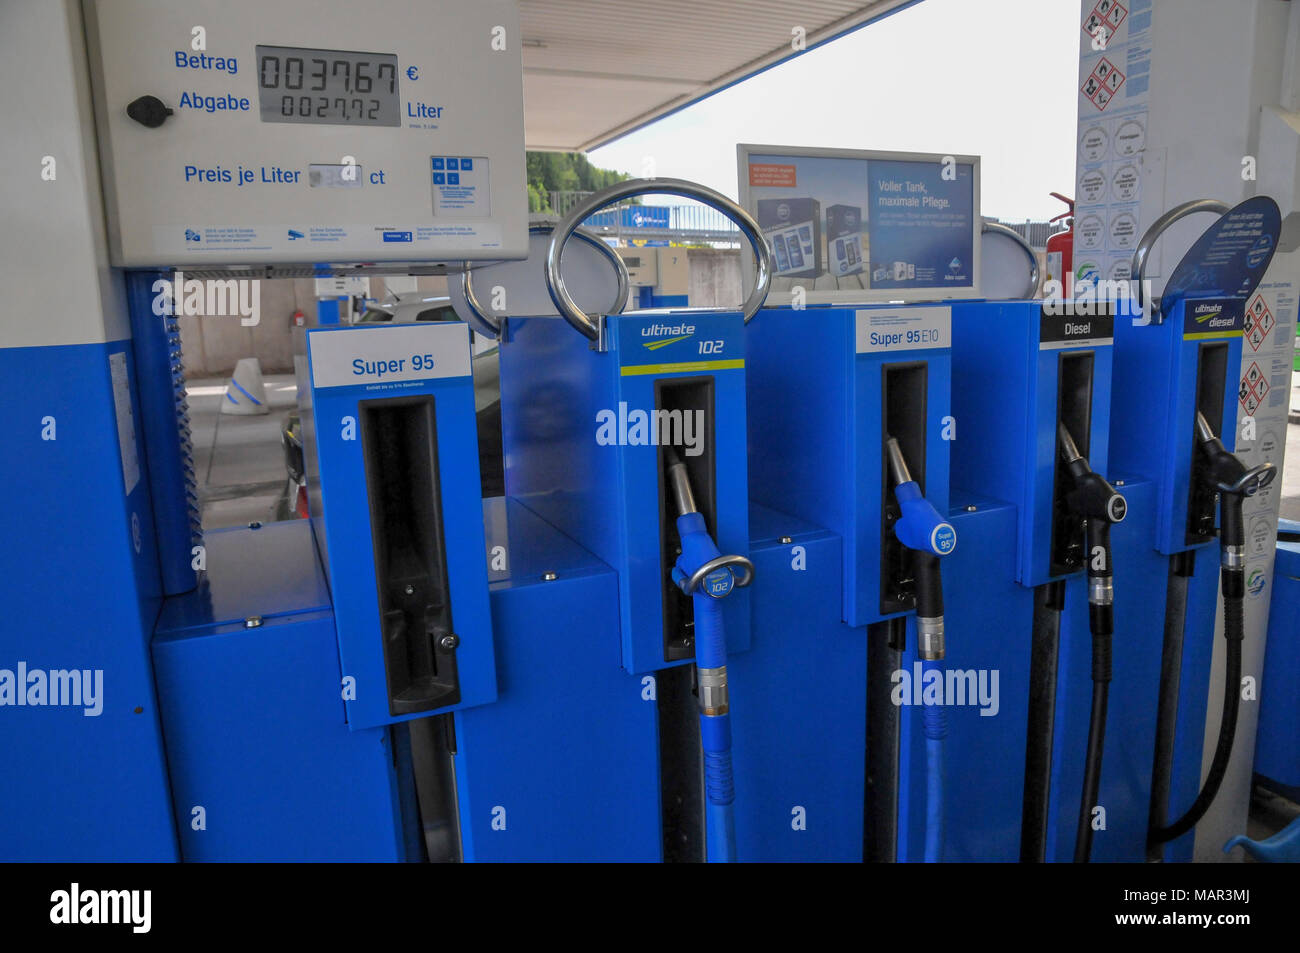 Petrol Station car is refuelled with unleaded super 95 petrol. Photographed in Germany Stock Photo